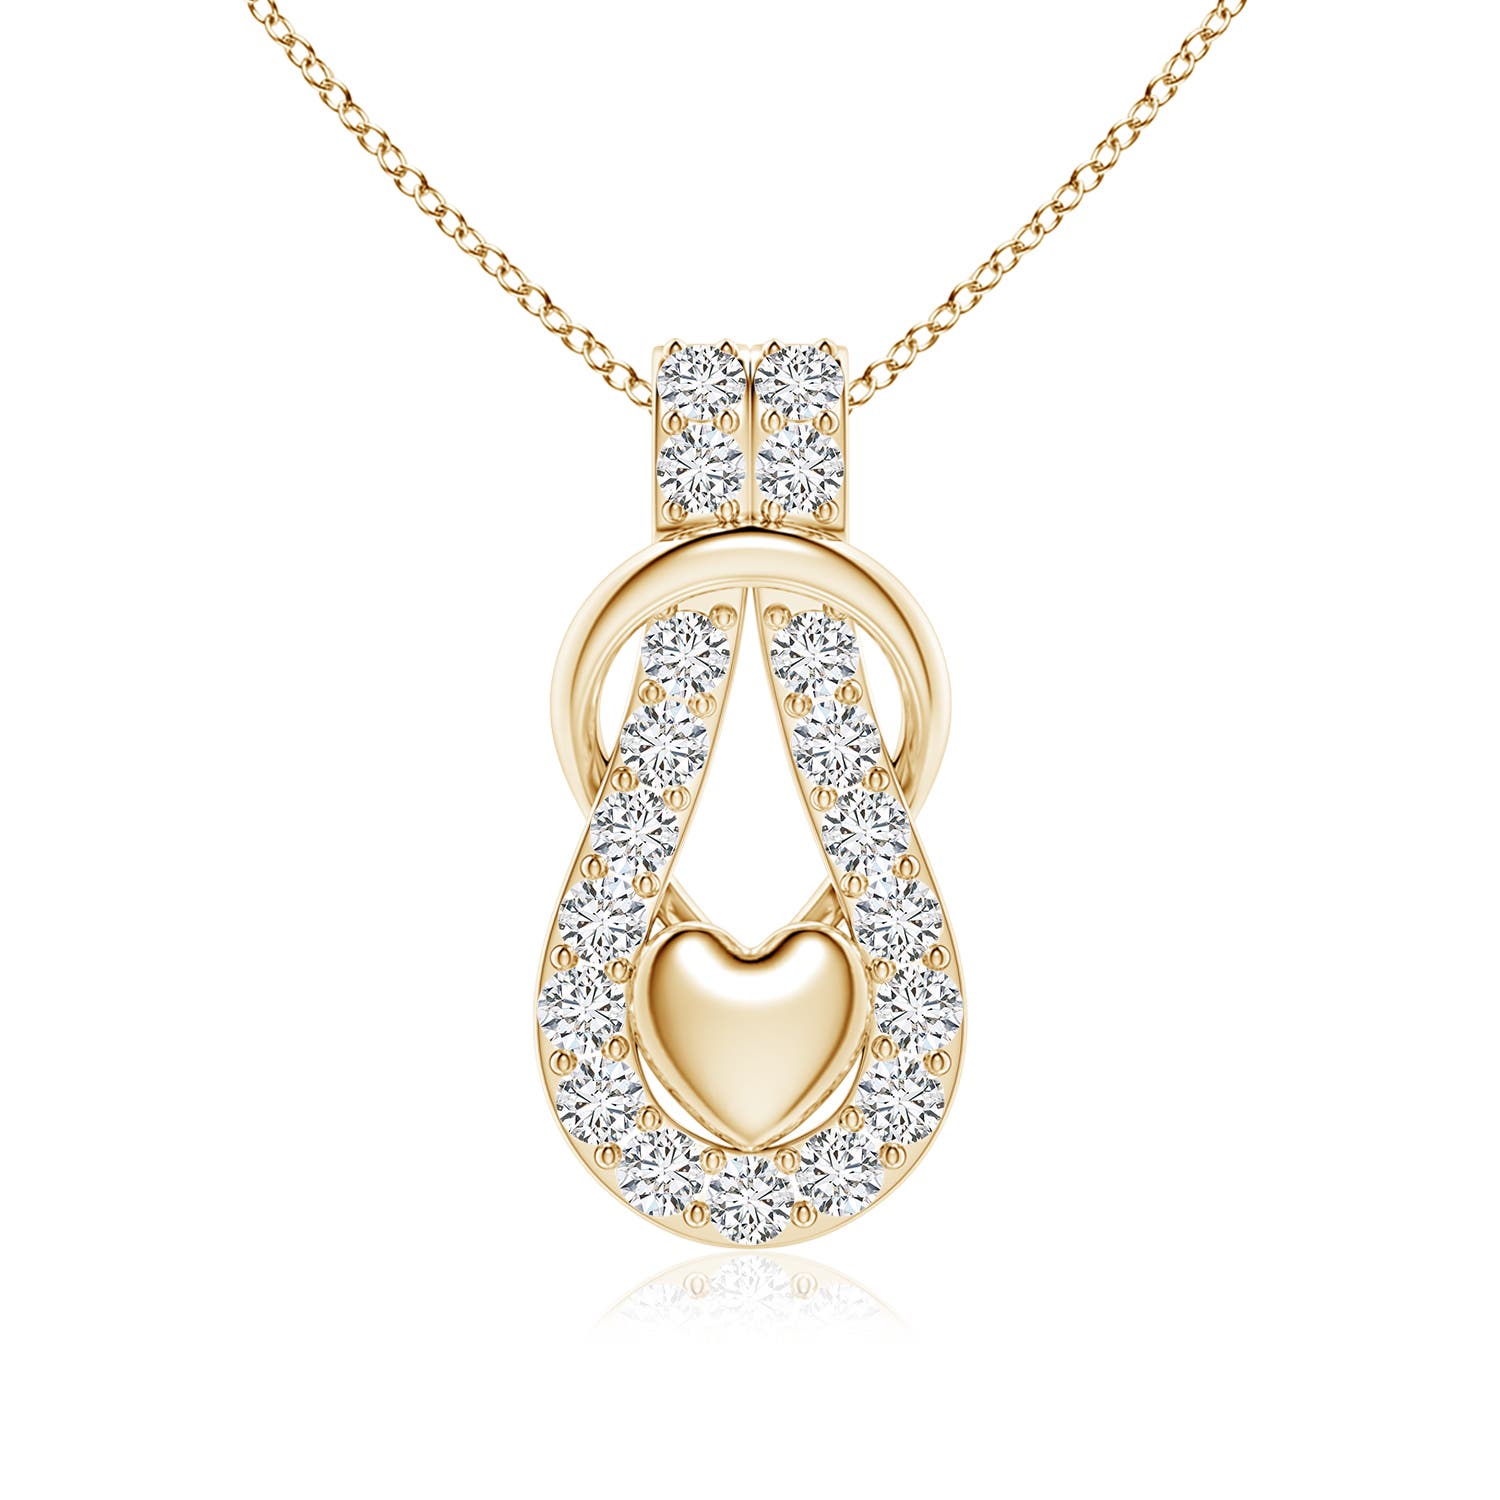 H, SI2 / 1.99 CT / 14 KT Yellow Gold